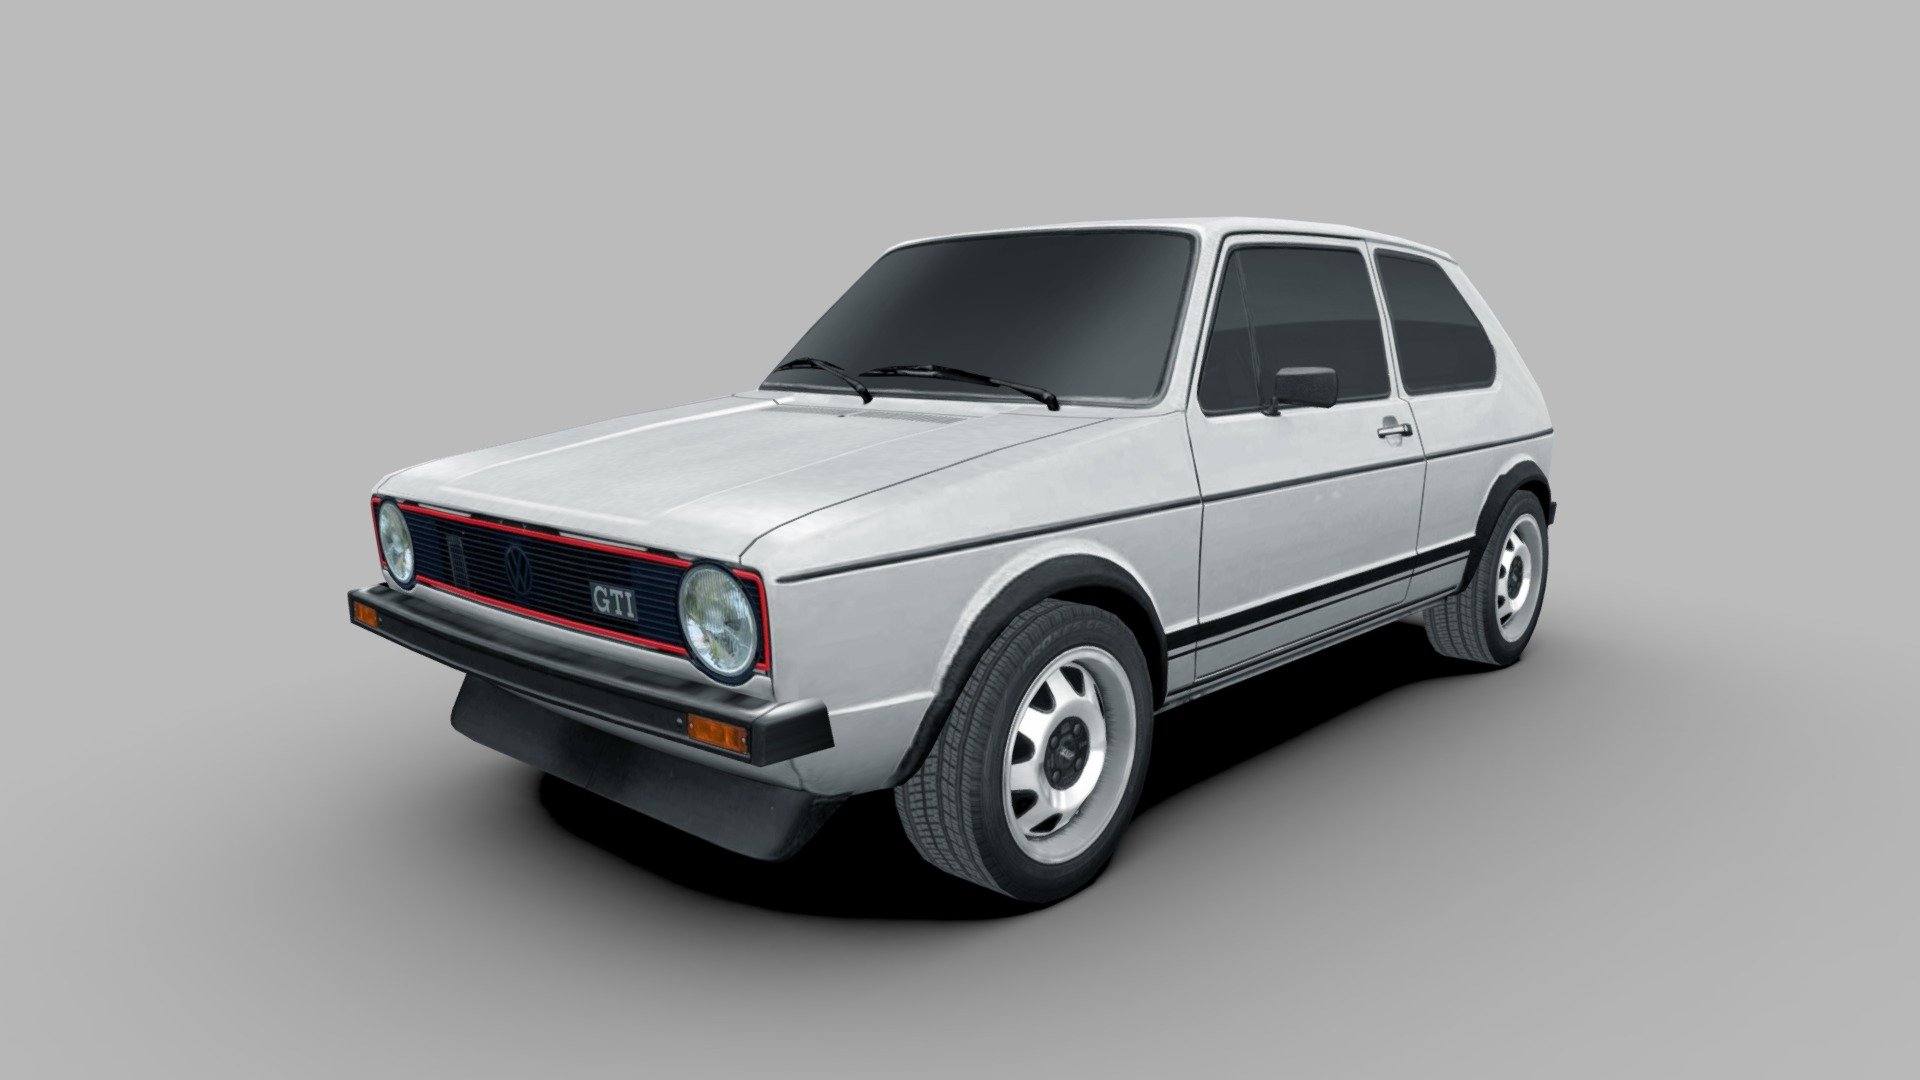 3d model of the 1976 Volkswagen Golf GTI, a small family car hatchback

The model is very low-poly, full-scale, real photos texture (single 2048 x 2048 png).

Package includes 5 file formats and texture (3ds, fbx, dae, obj and skp)

Hope you enjoy it.

José Bronze - Volkswagen Golf GTI 1976 - Buy Royalty Free 3D model by Jose Bronze (@pinceladas3d) 3d model